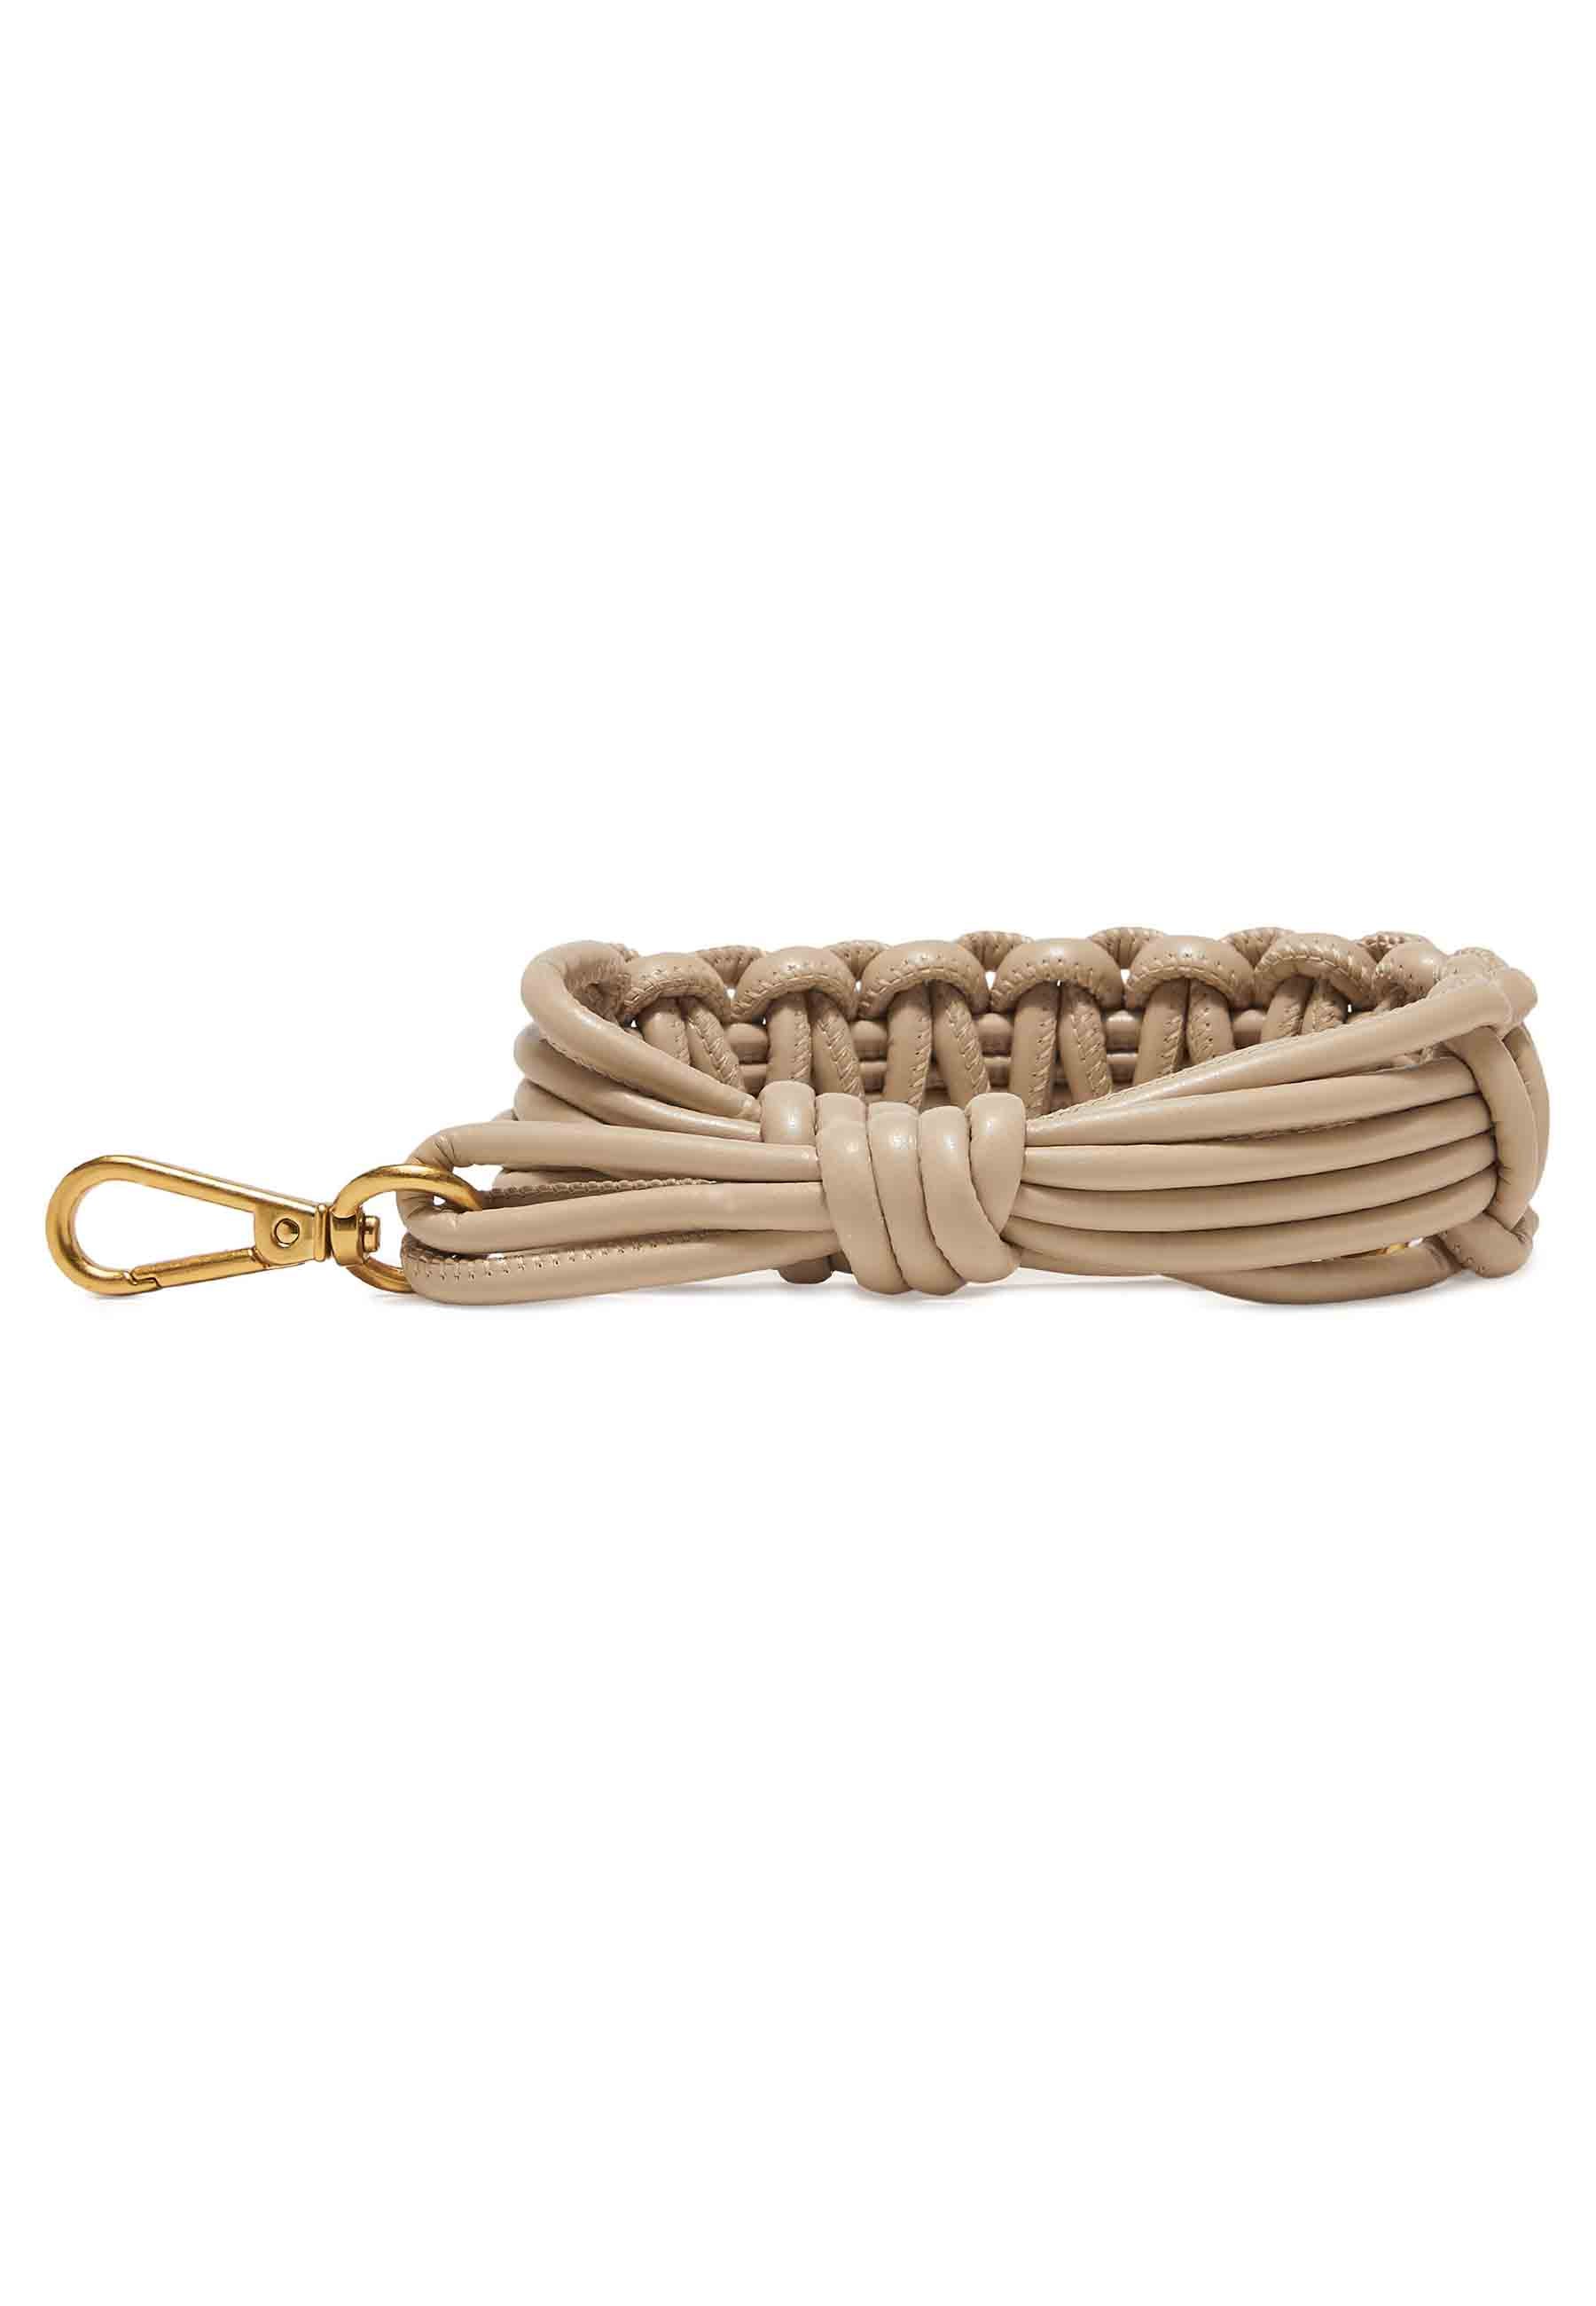 Pearl gray woven leather shoulder strap with gold-coloured hooks